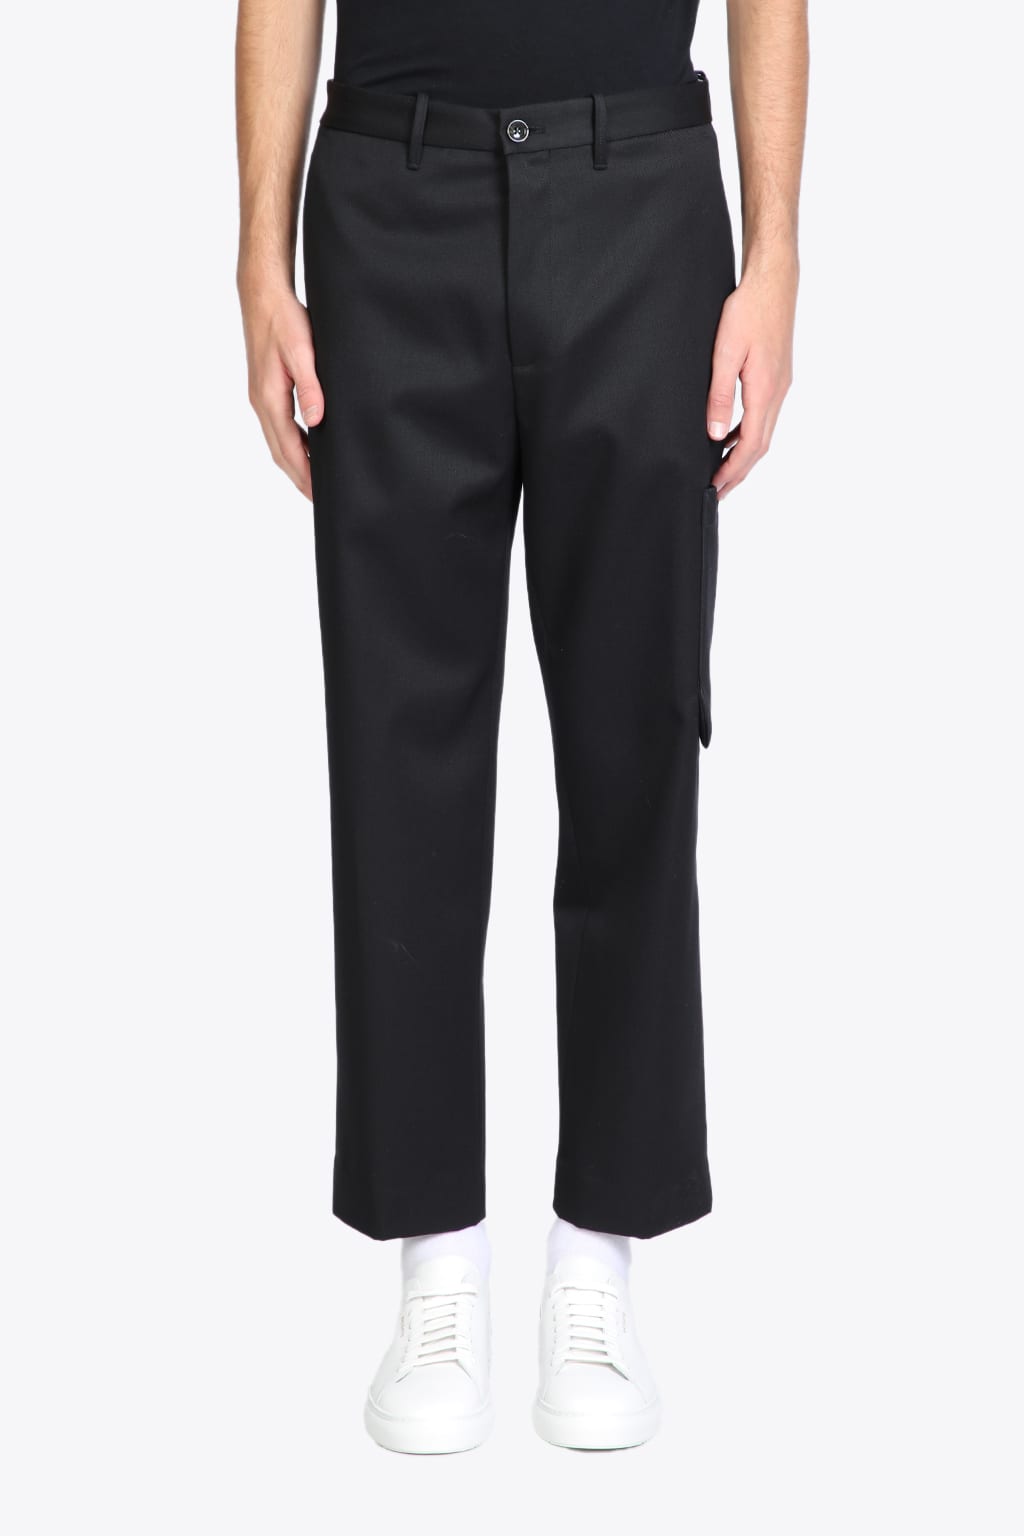 Nine in the Morning Arnold - Cargo Relaxed Con Ricamo Black wool relaxed cargo pant - Arnold